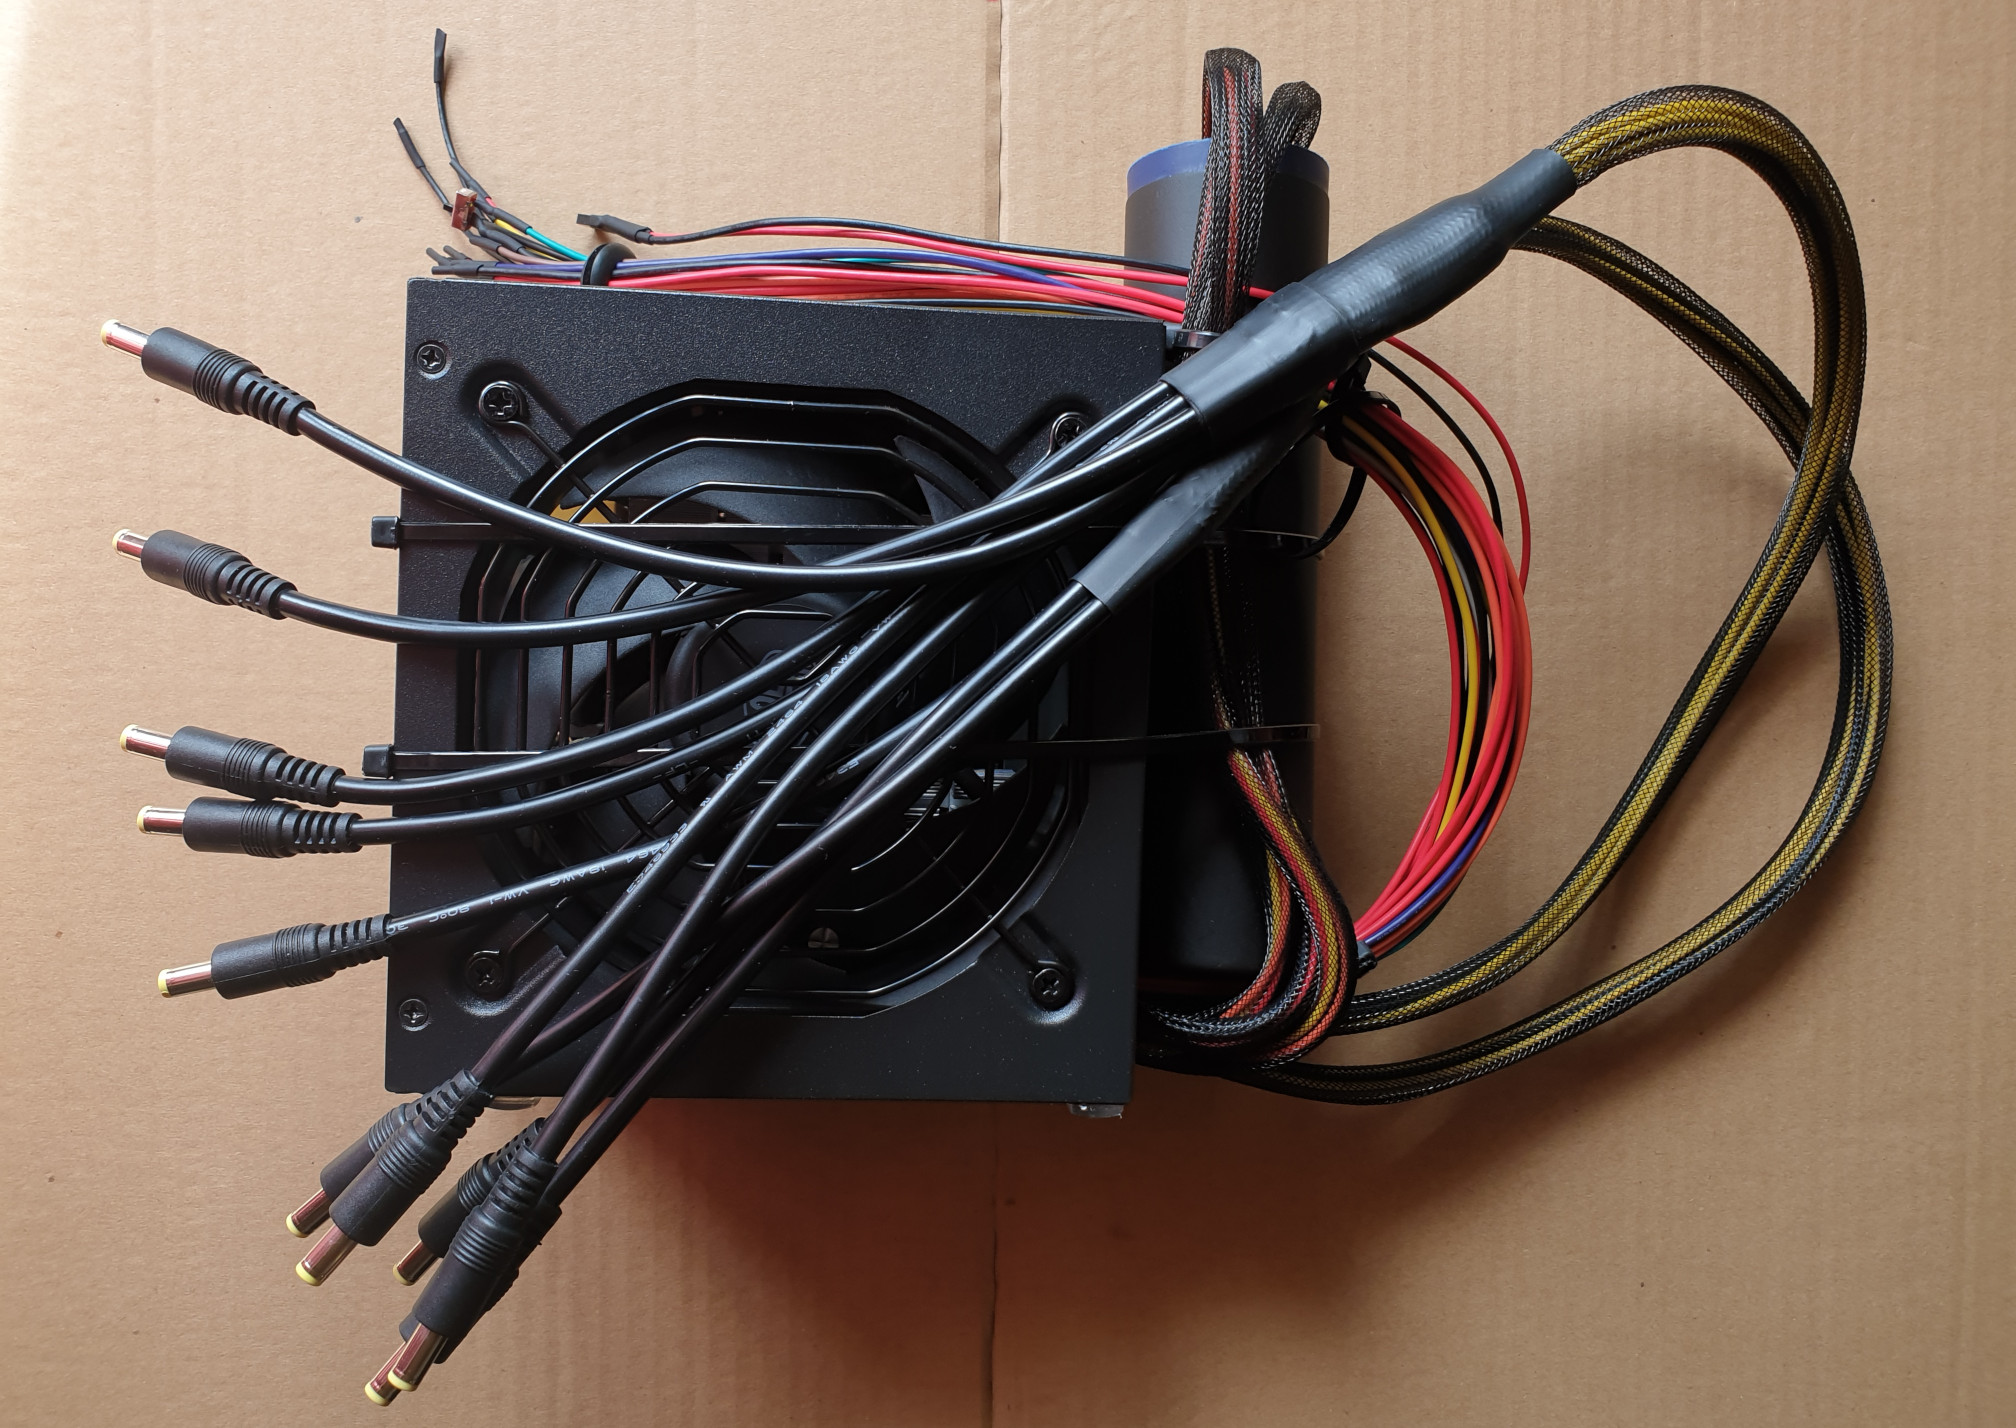 ATX power supply with incomplete modifications, extra cables stored in the black cylinder 